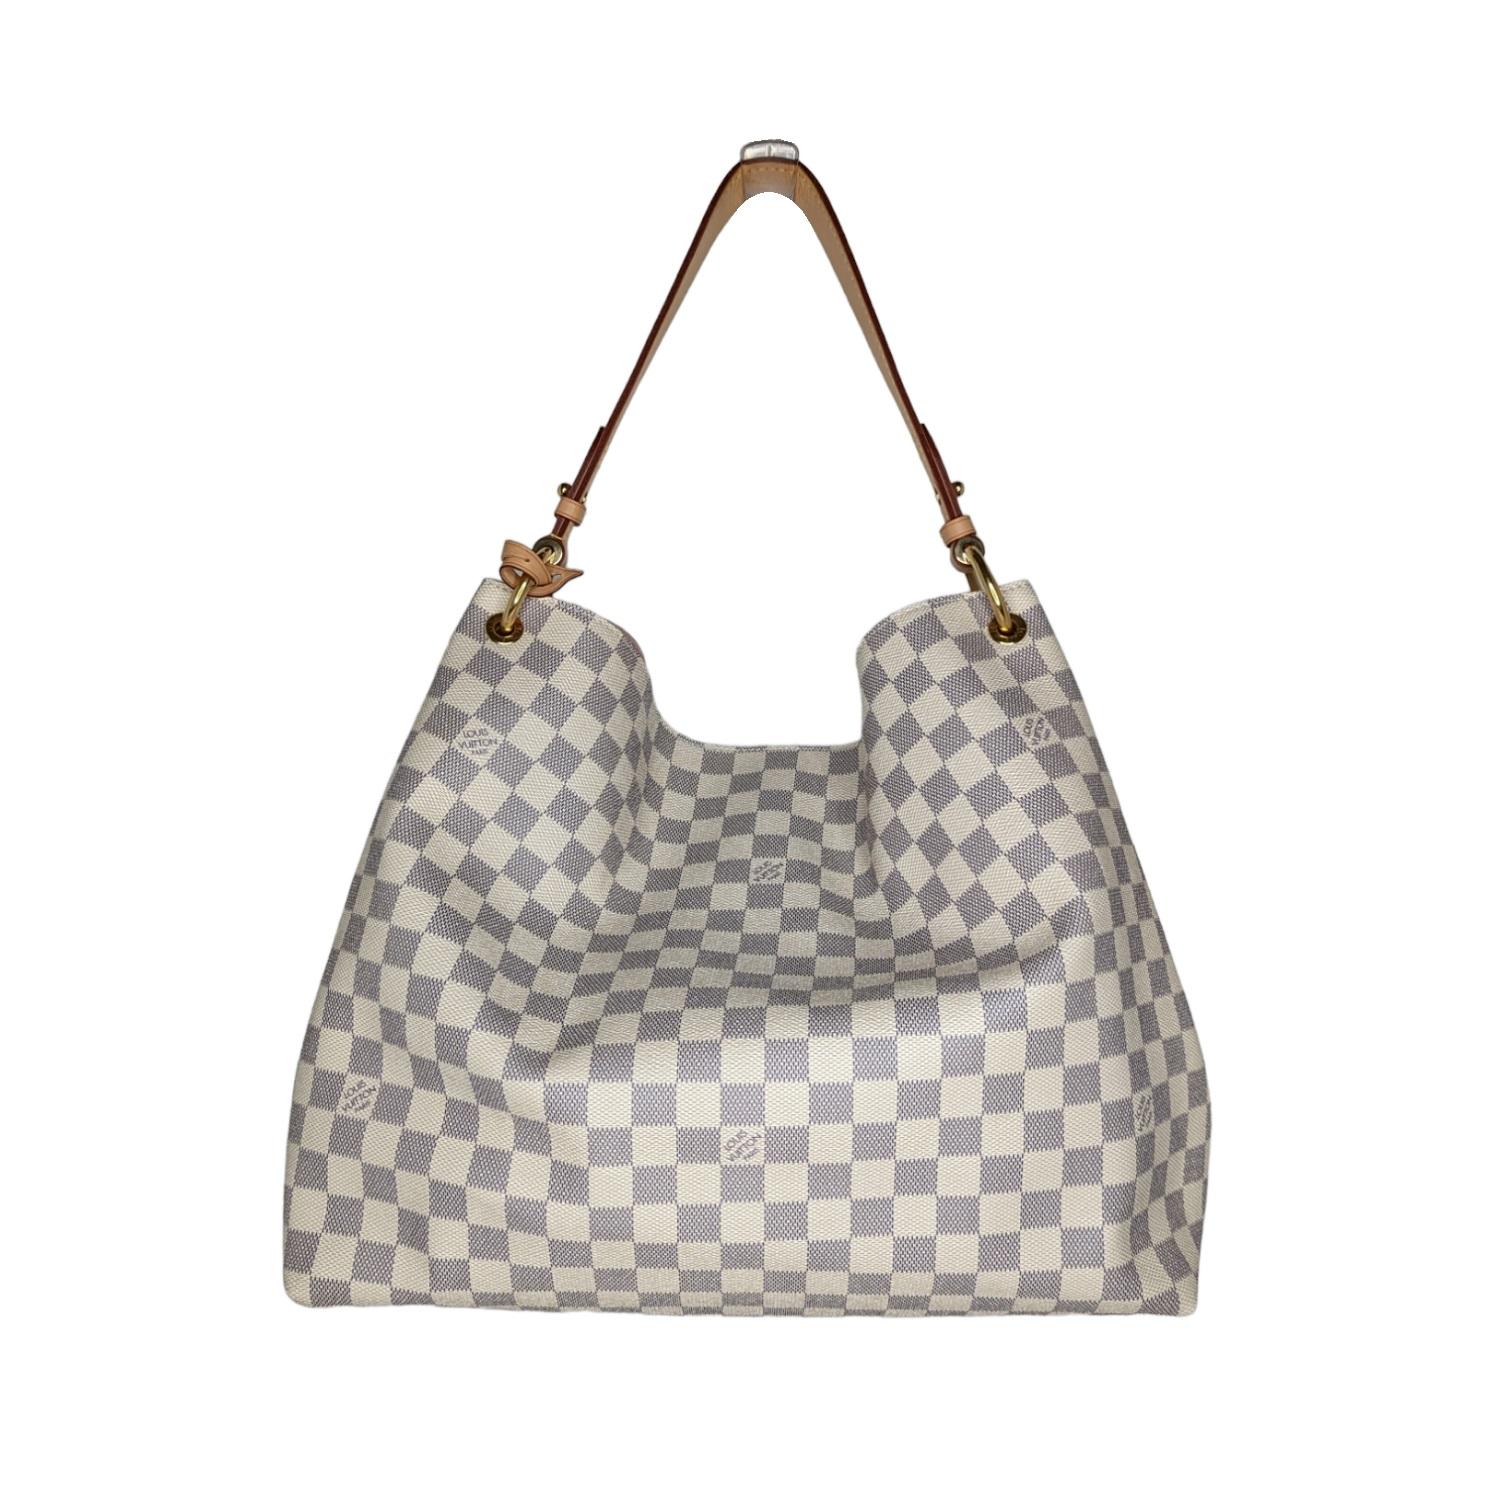 The Graceful MM hobo in fresh Damier Azur canvas is an extra-roomy yet lightweight bag to carry every day. Natural leather detailing and shiny gold-tone hardware add a refined, signature touch. The body-friendly design combines with a supple, flat